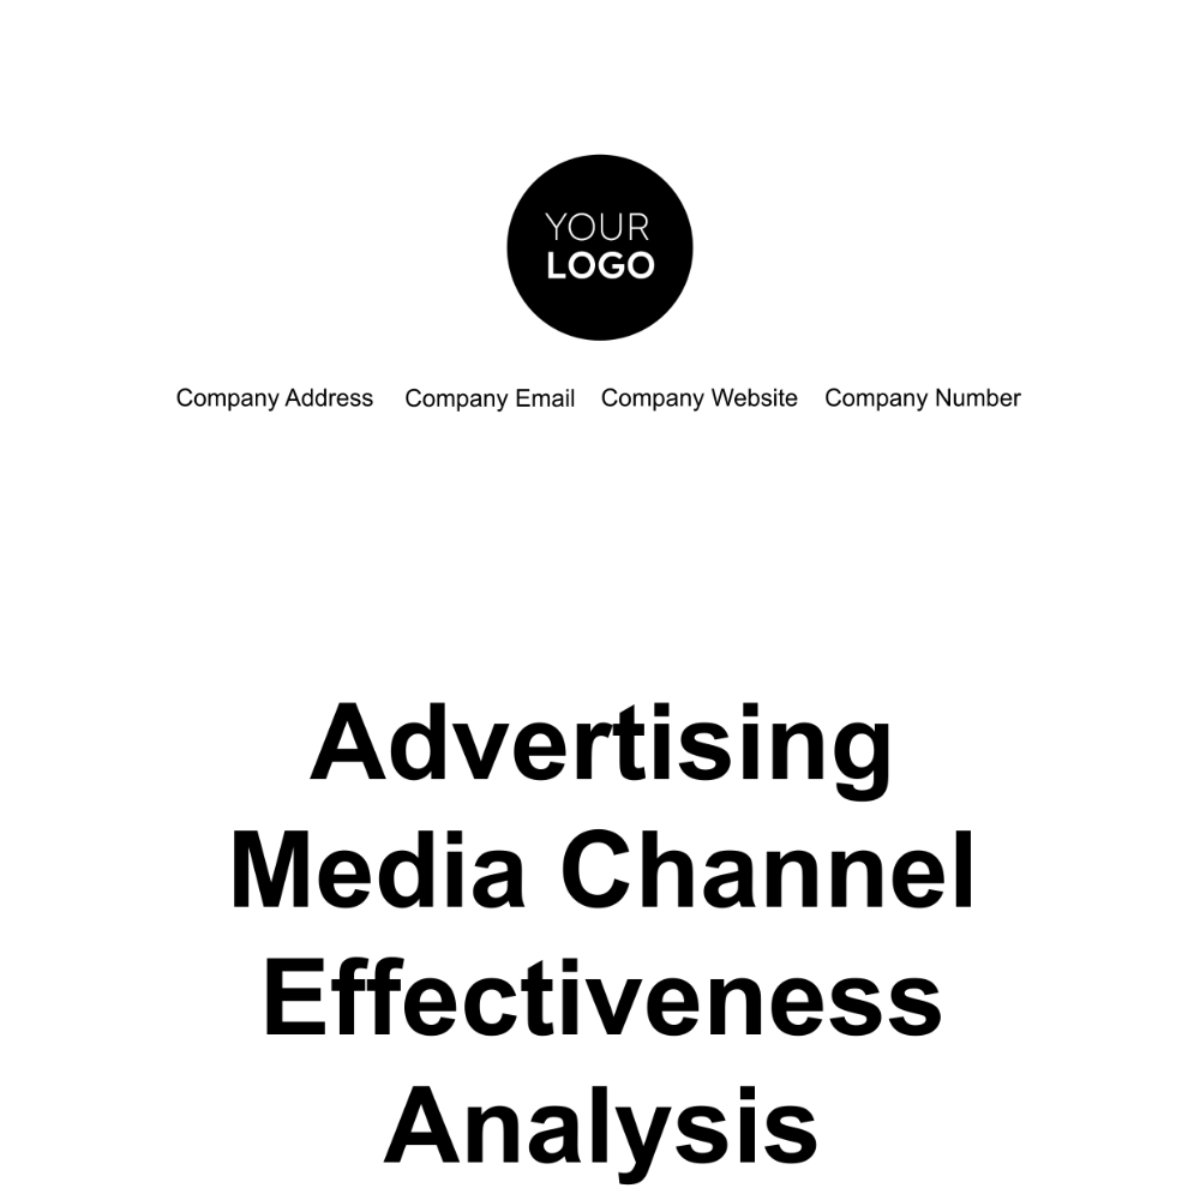 Advertising Media Channel Effectiveness Analysis Template